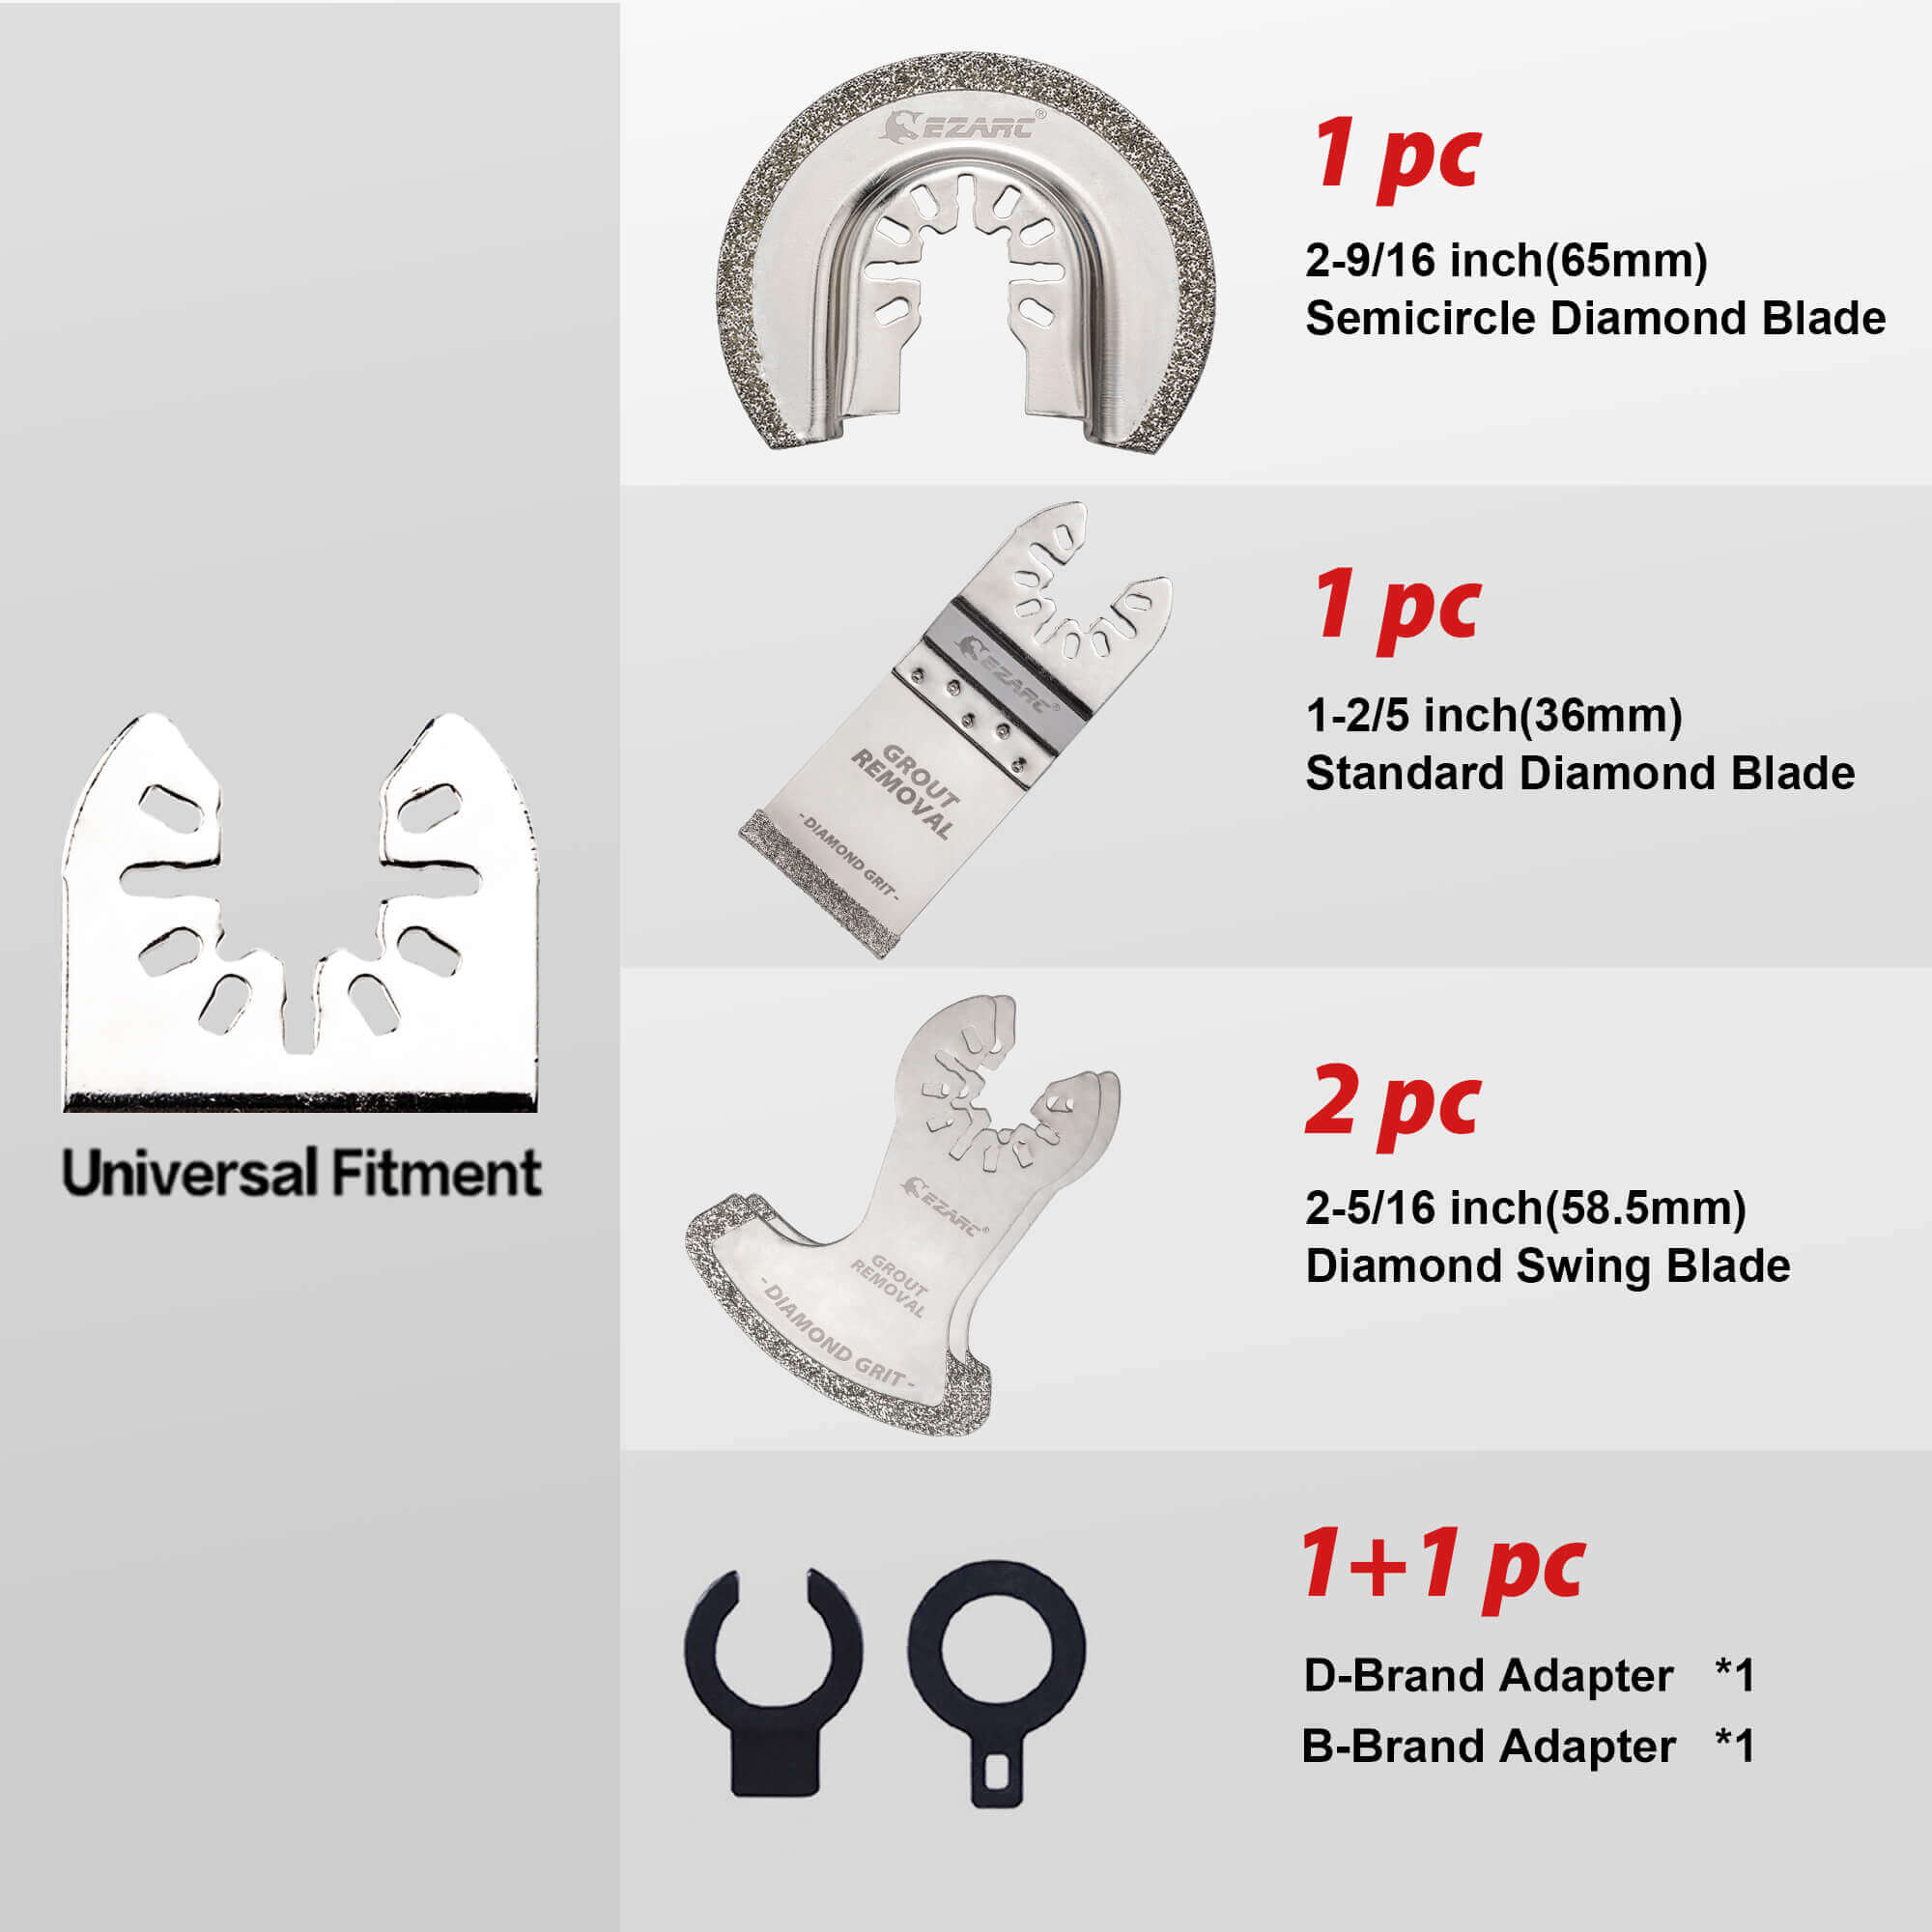 Universal Fit Diamond Grit Oscillating Blade Set For Grout and Soft Tile